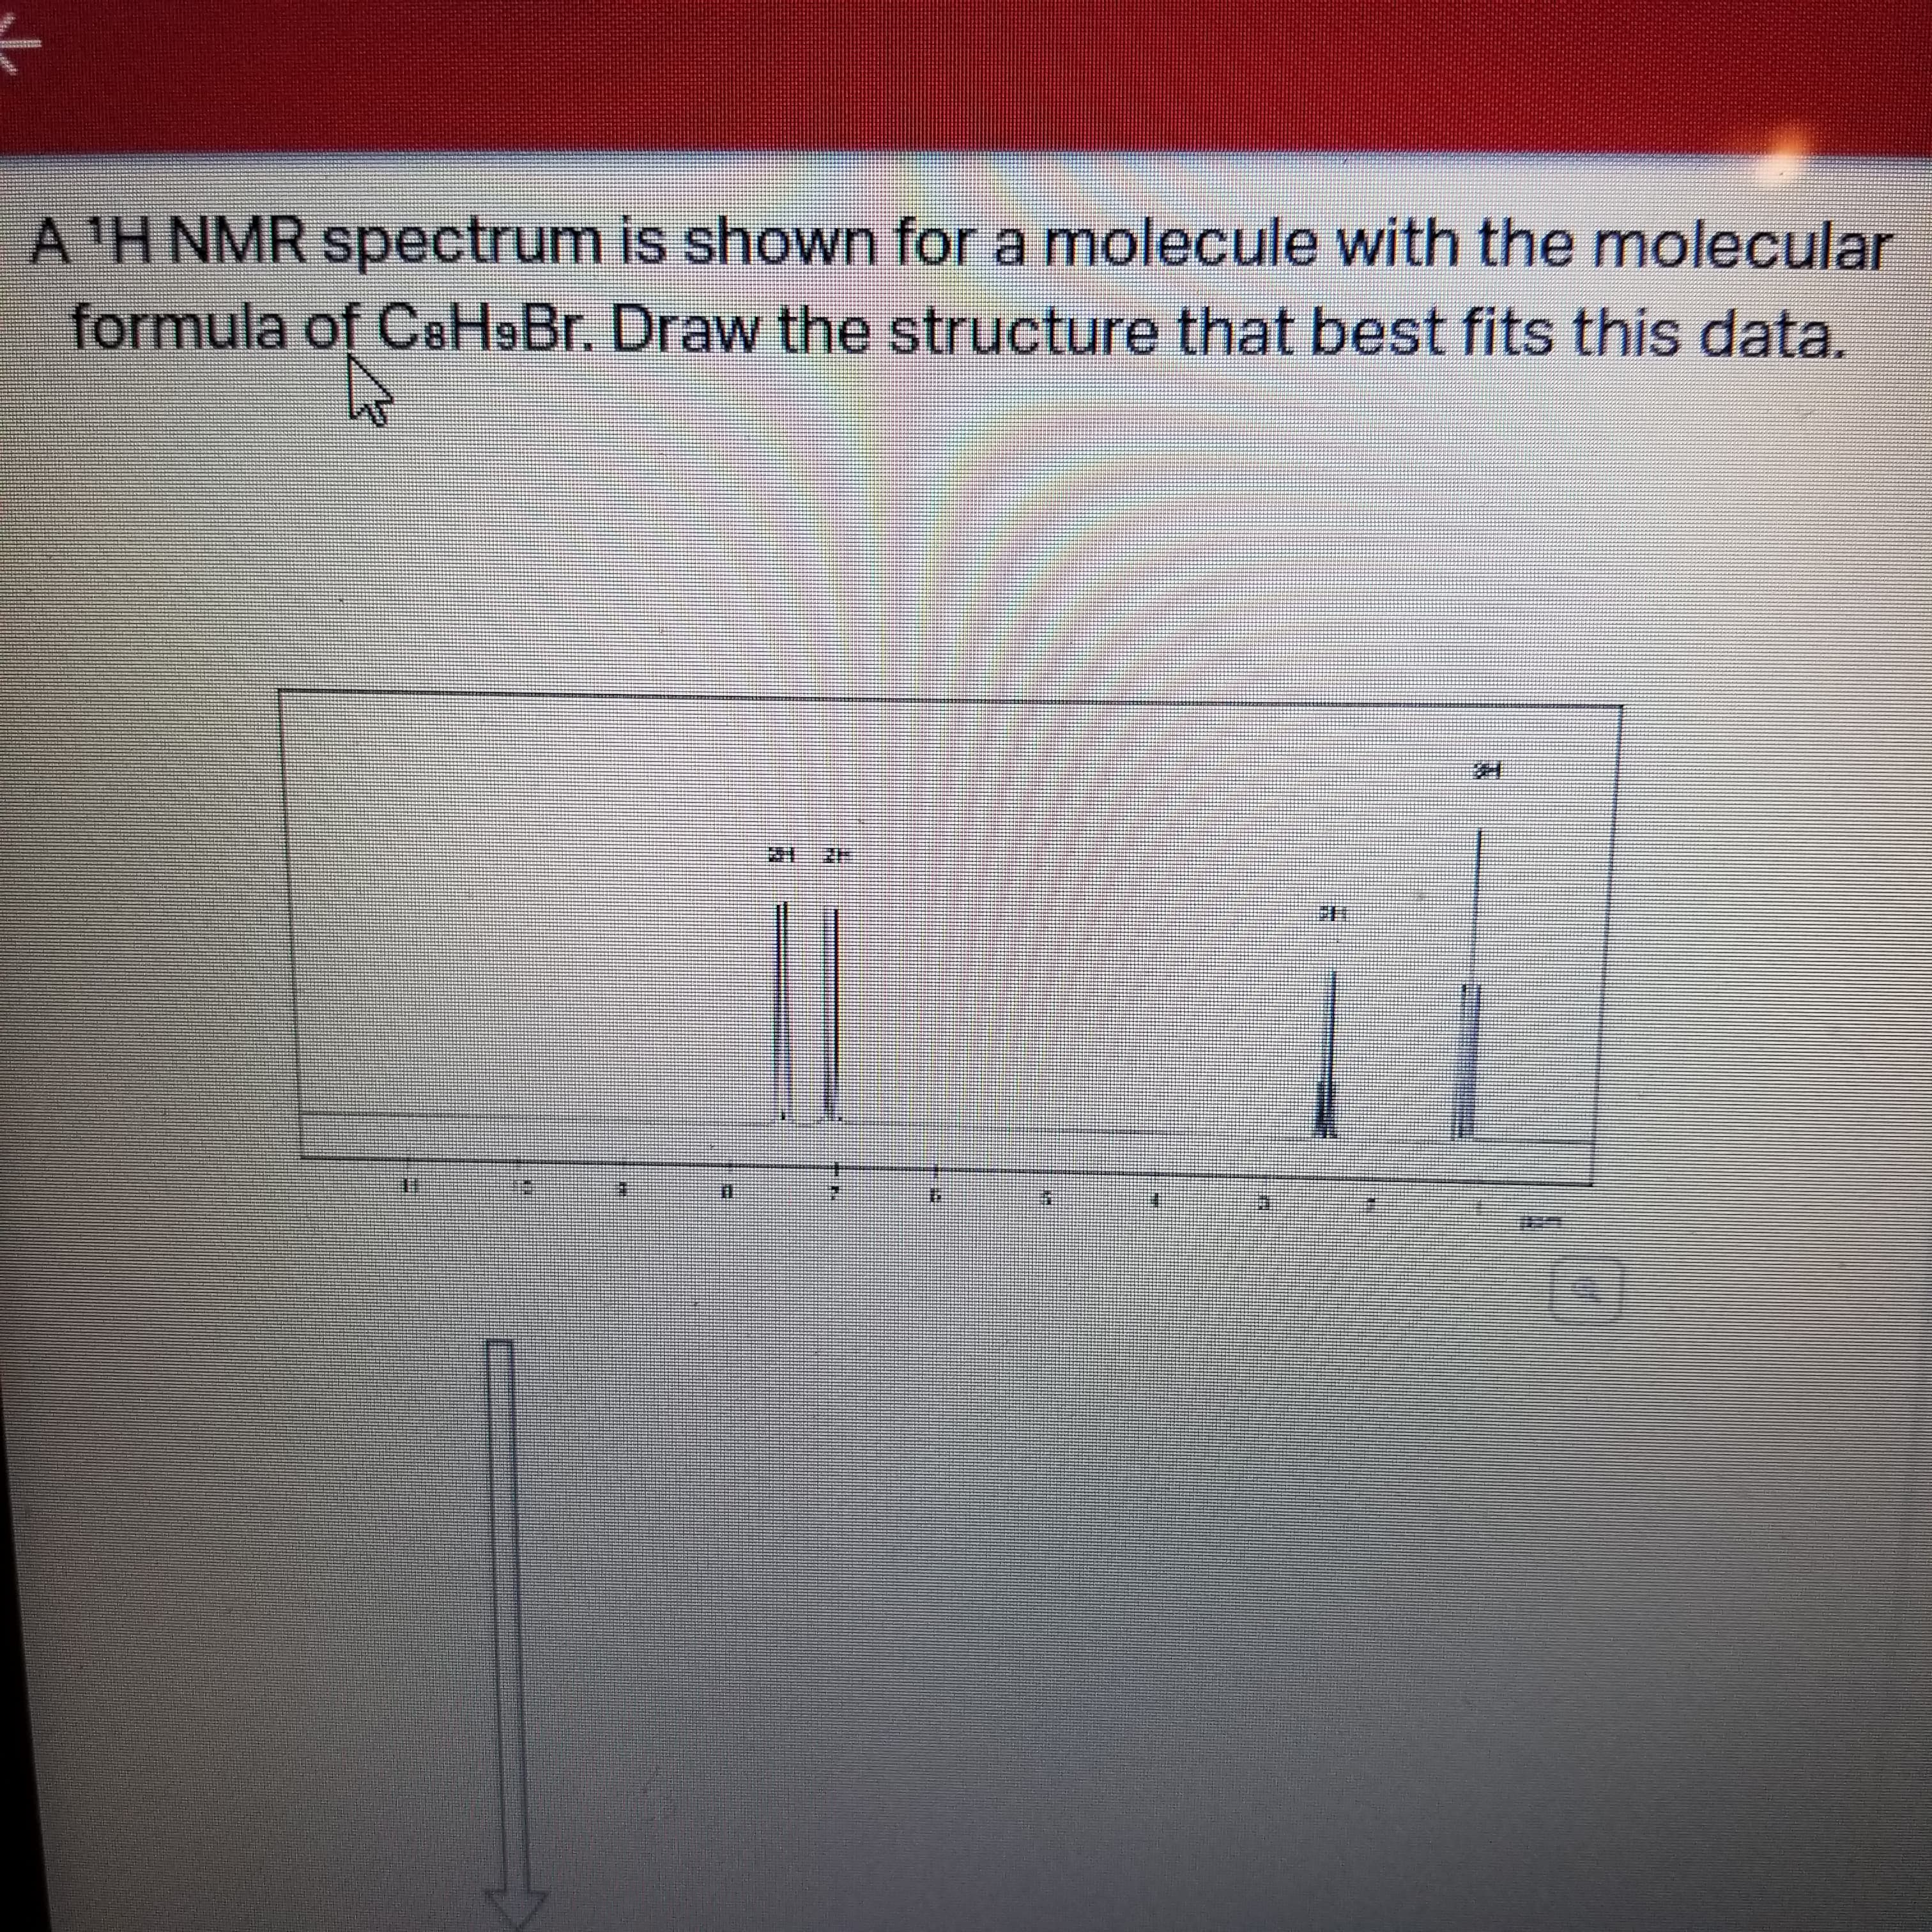 A'H NMR spectrum is shown for a molecule with the molecular
formula of CeH9Br. Draw the structure that best fits this data.
